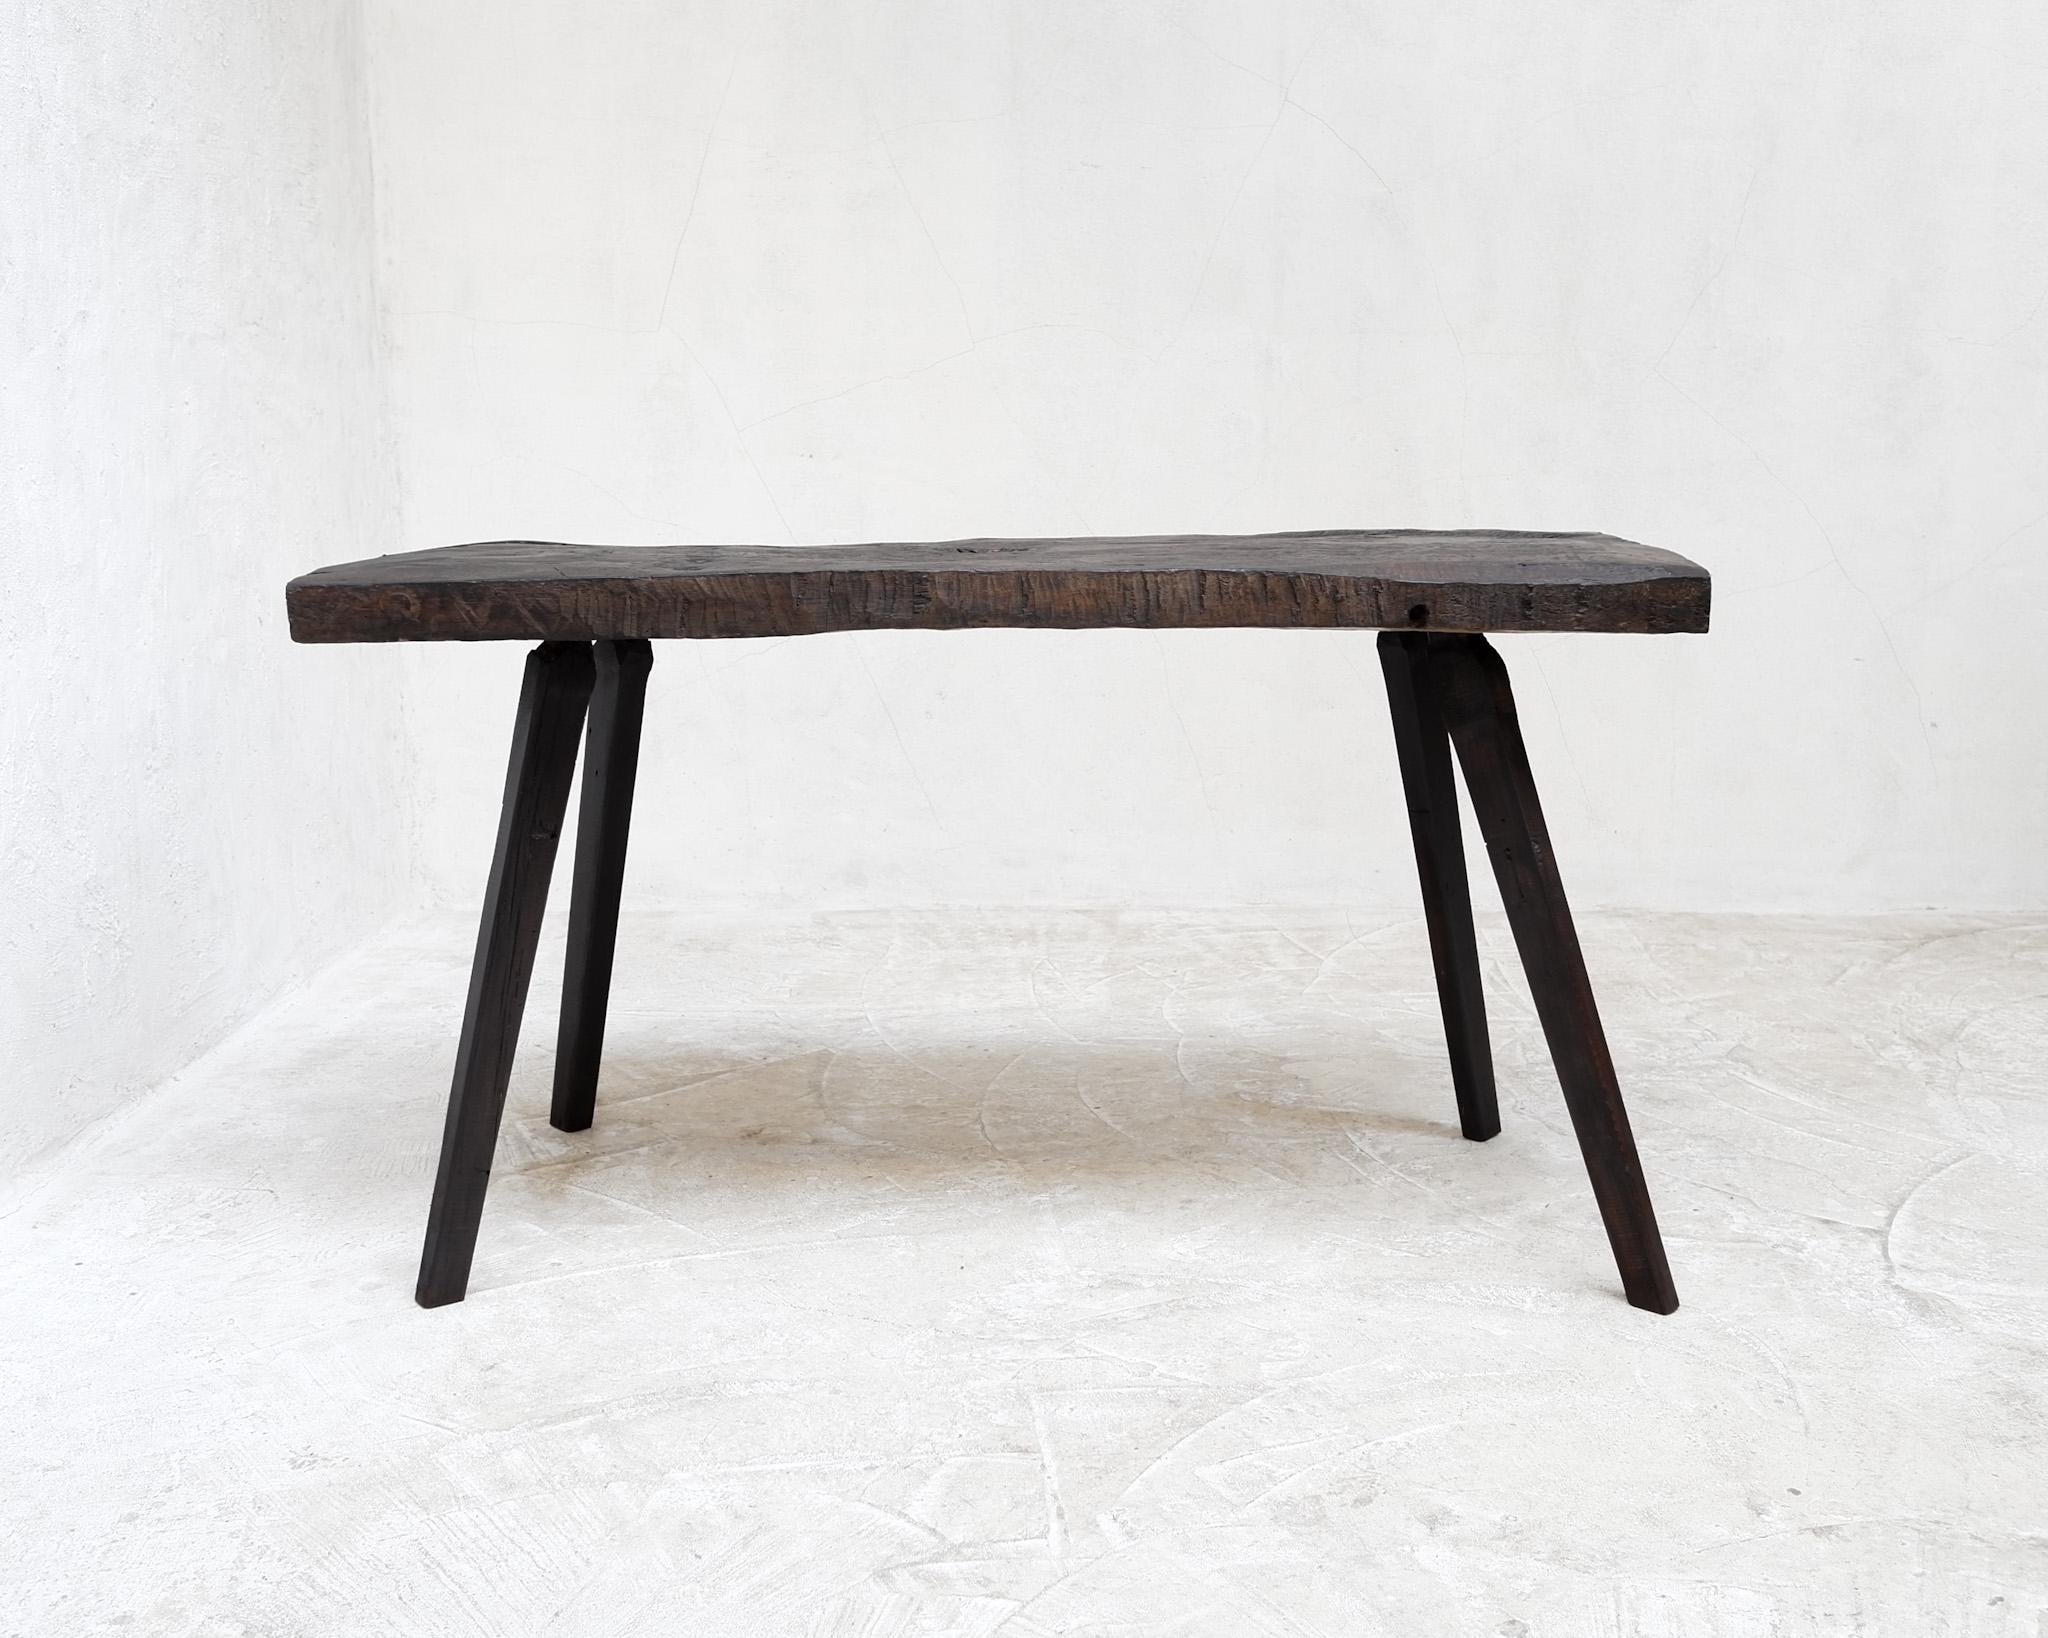 A 19th C. Solid beech table from the mountains of Transylvania.

Heavily patinated thick hand cut hewn top in matt wax finish.

-

We offer free shipping to the USA/Canada through Fedex with this item.